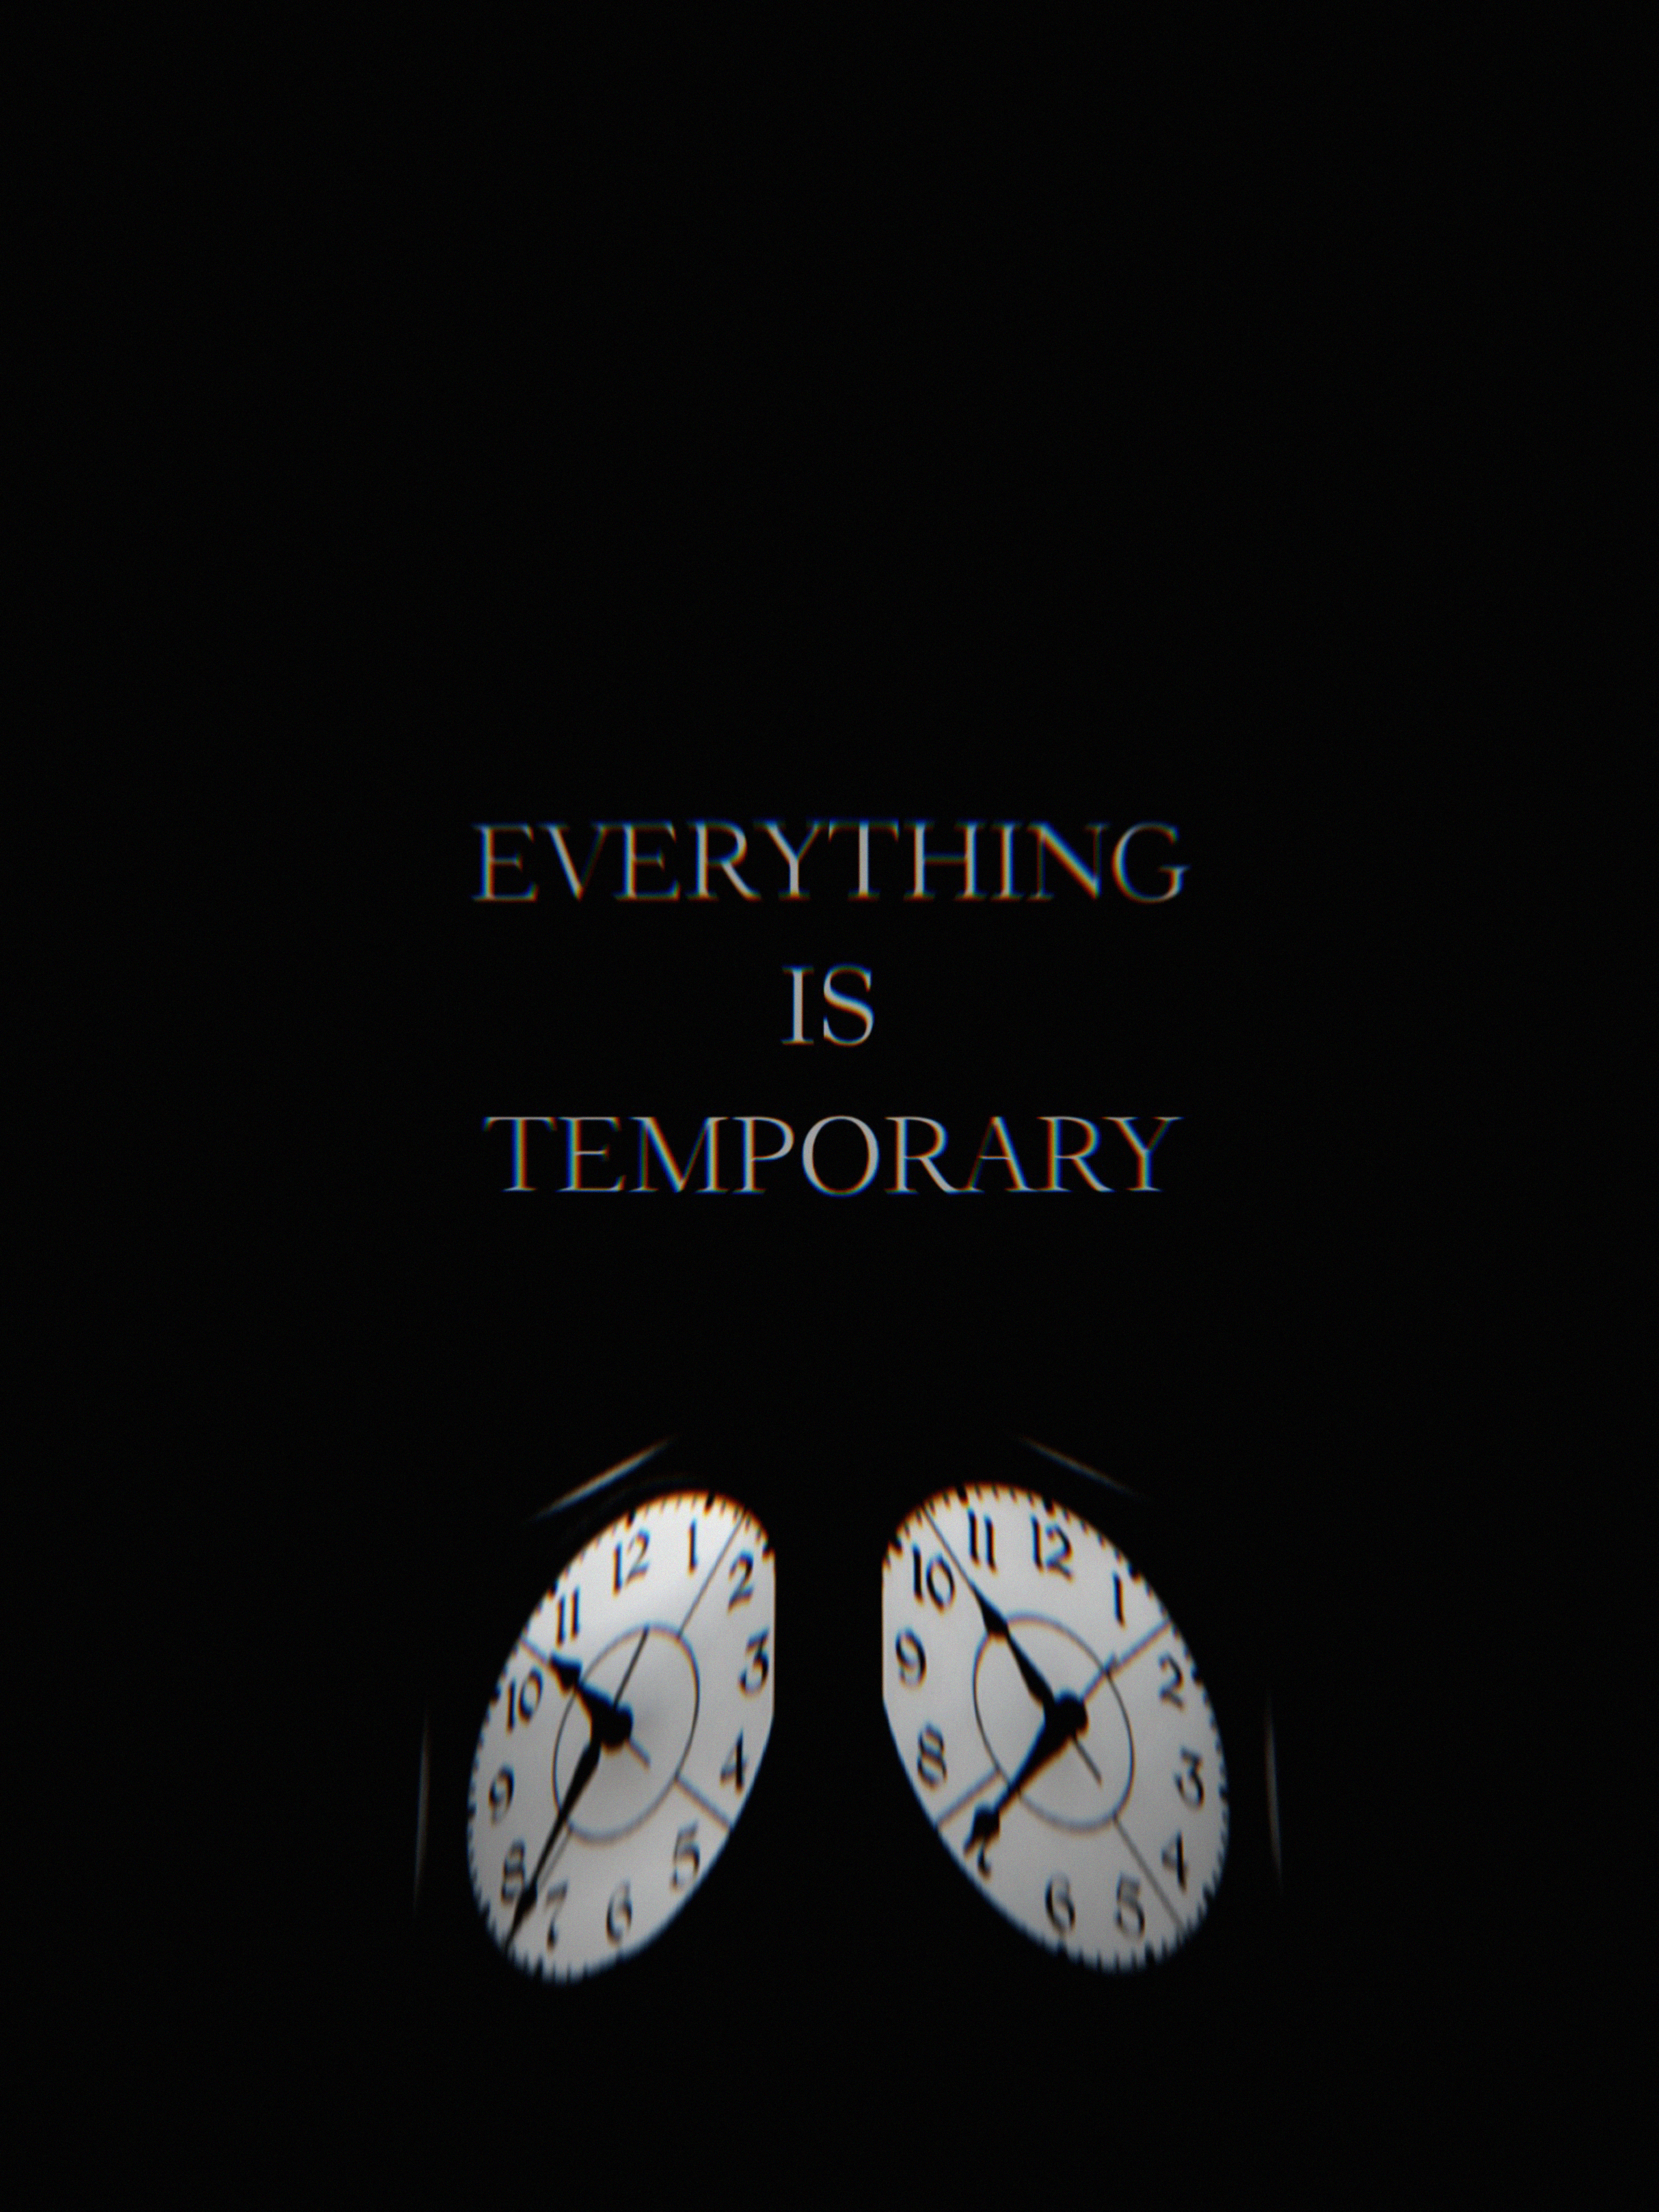 life, clock, words, glitch, time, it's time, temporary Full HD